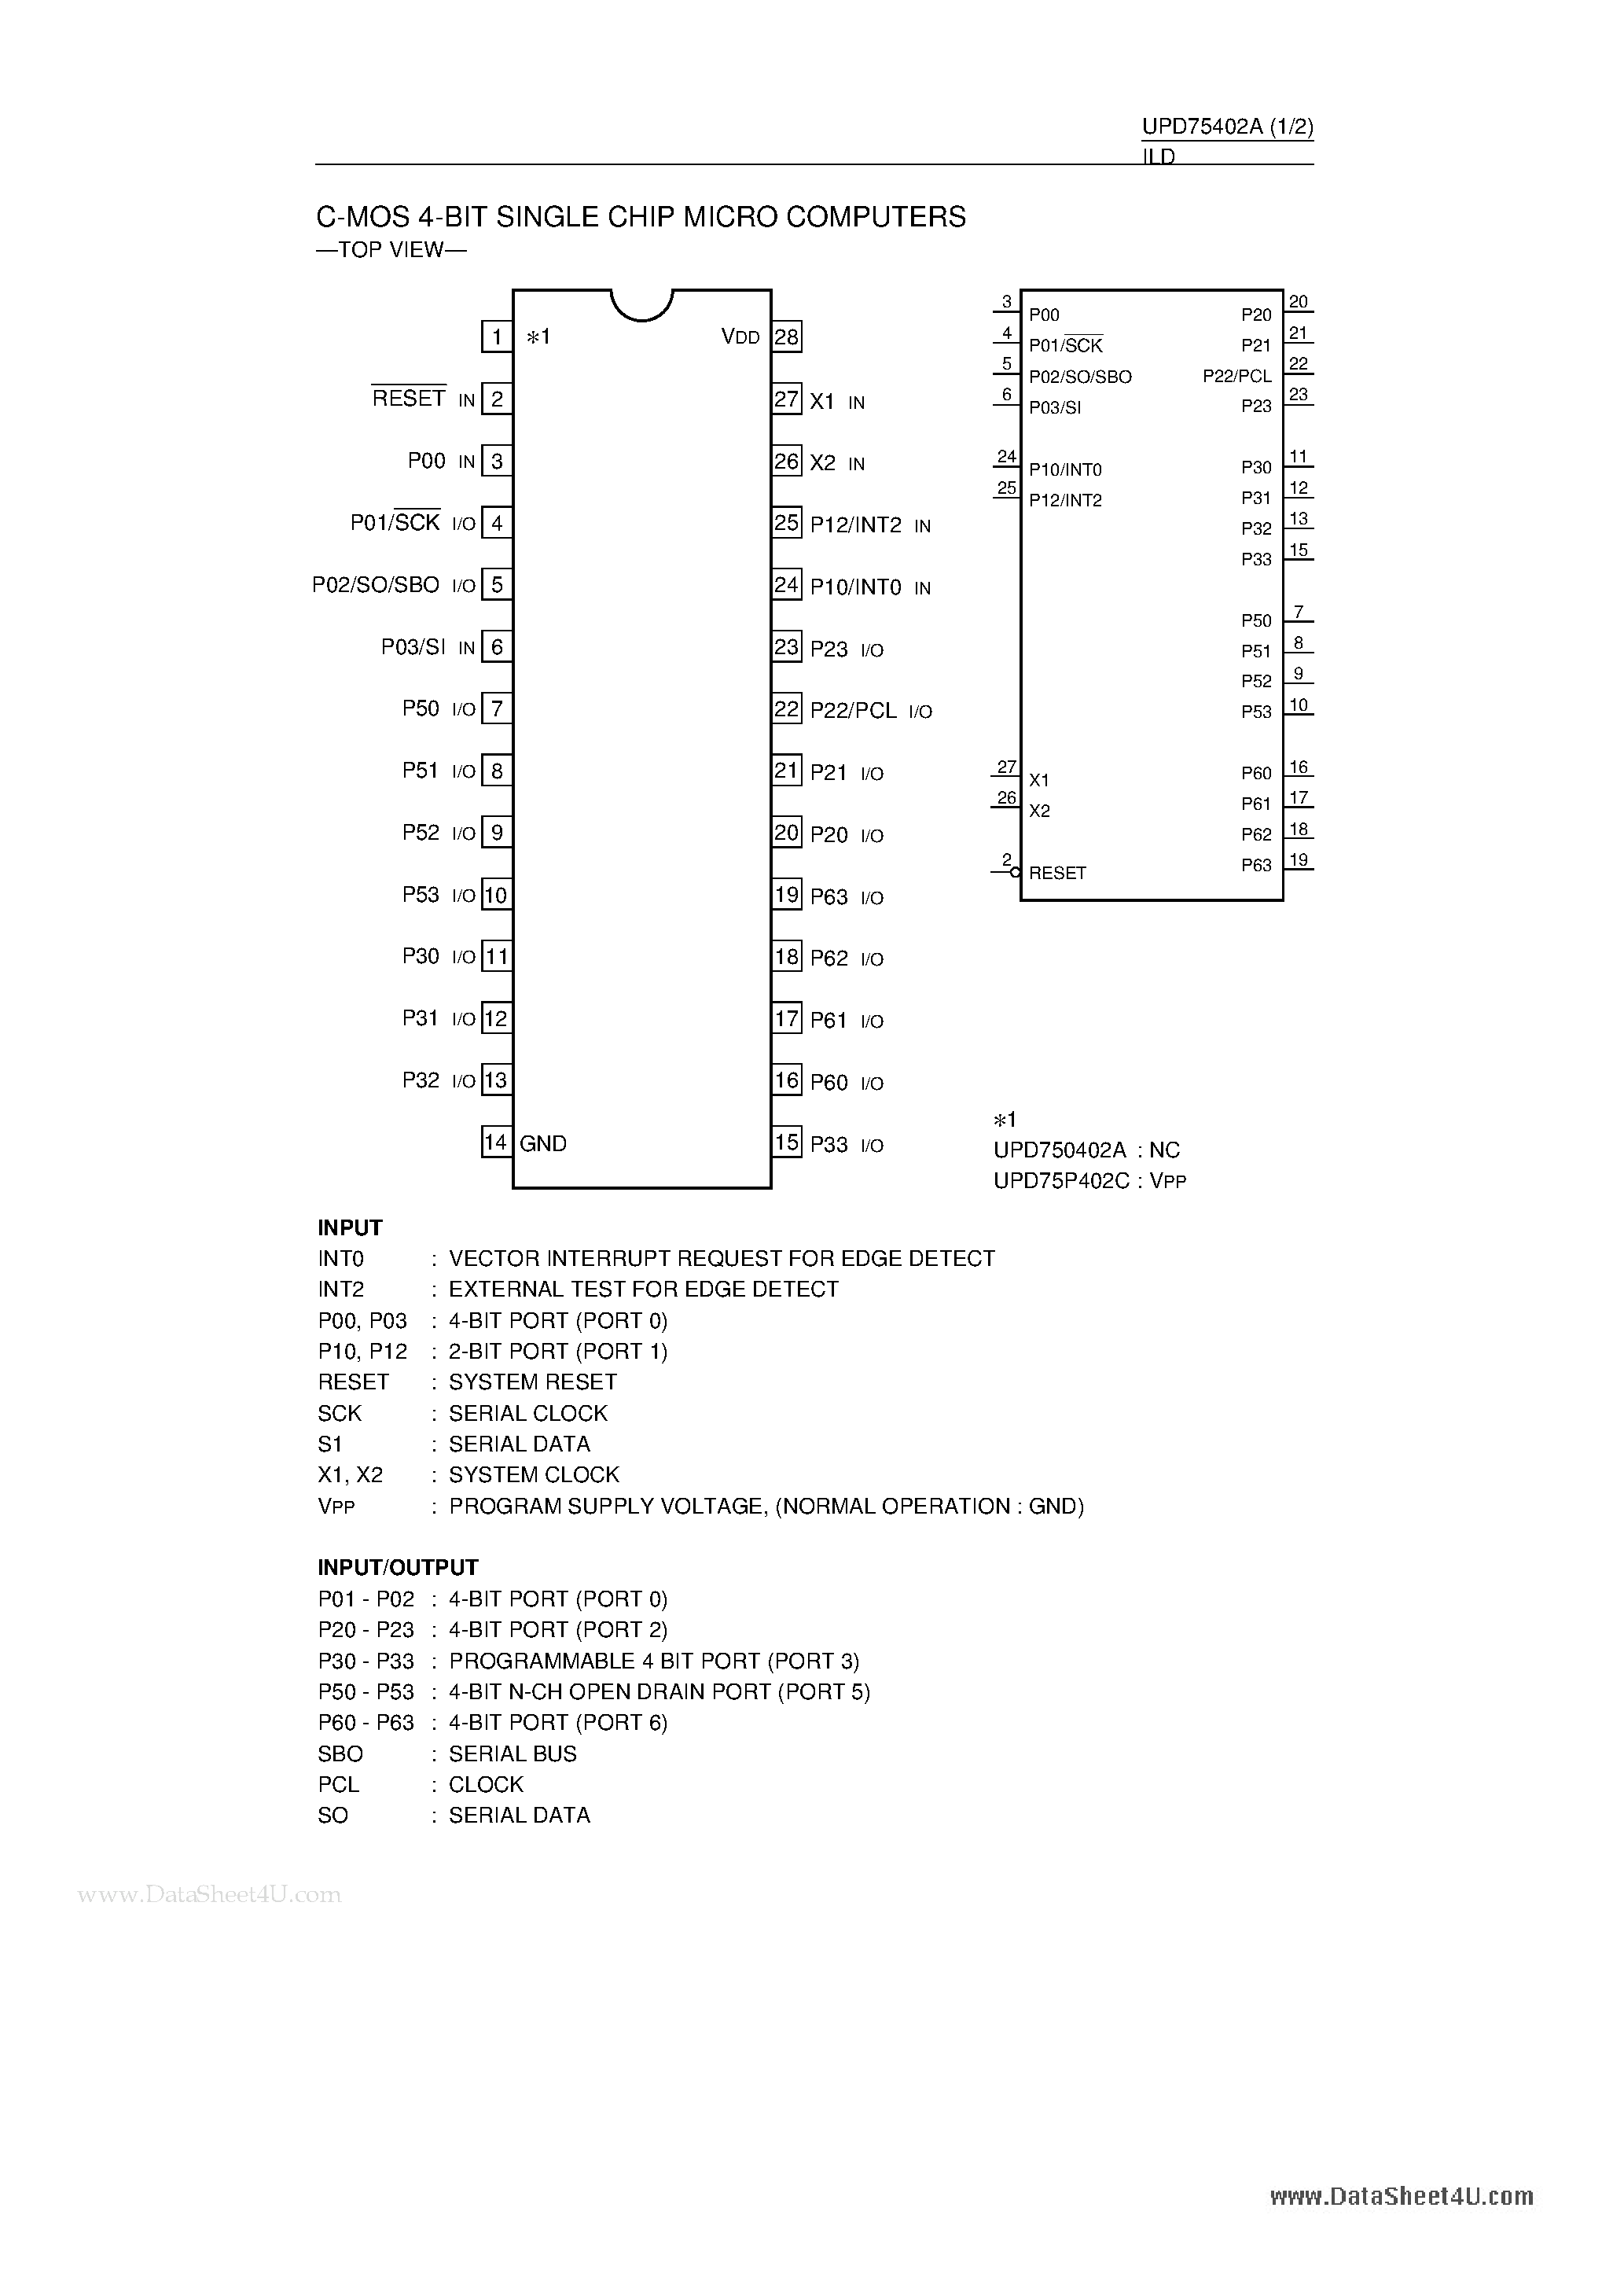 Datasheet UPD750402A - C-MOS 4-BIT SINGLE CHIP MICRO COMPUTERS page 1